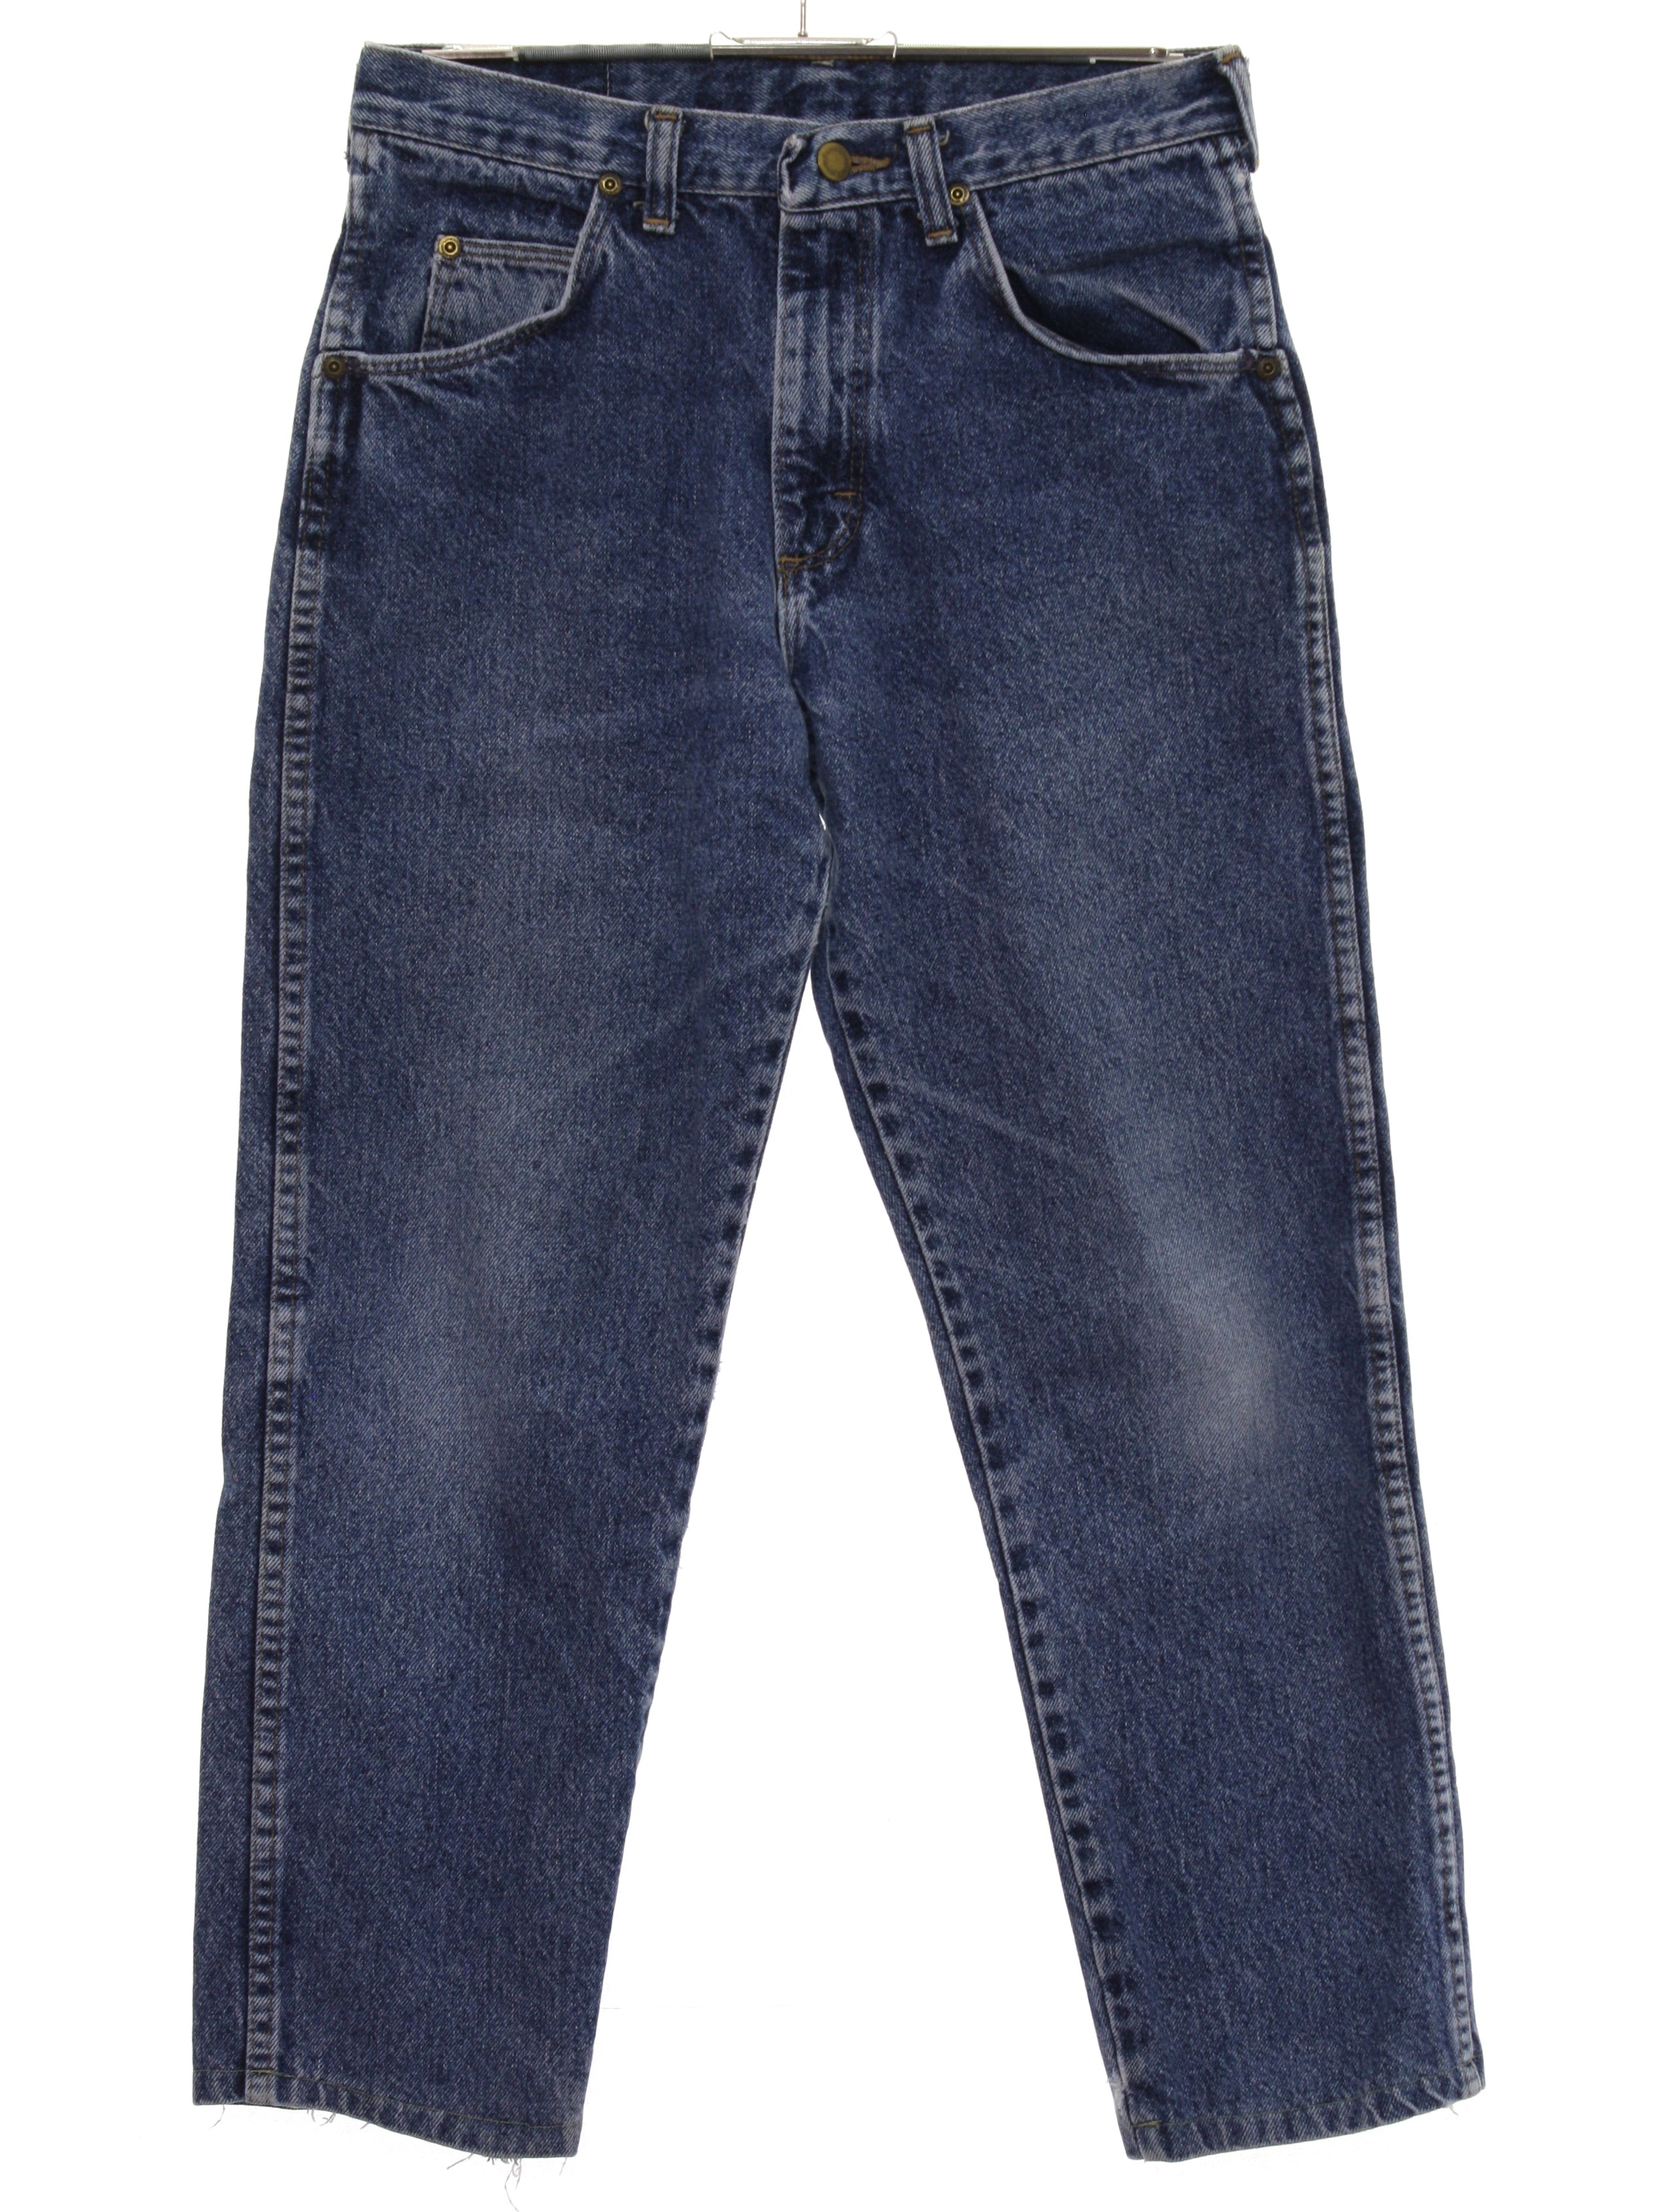 Retro Eighties Pants: Late 80s or early 90s Wrangler- Mens stone washed ...